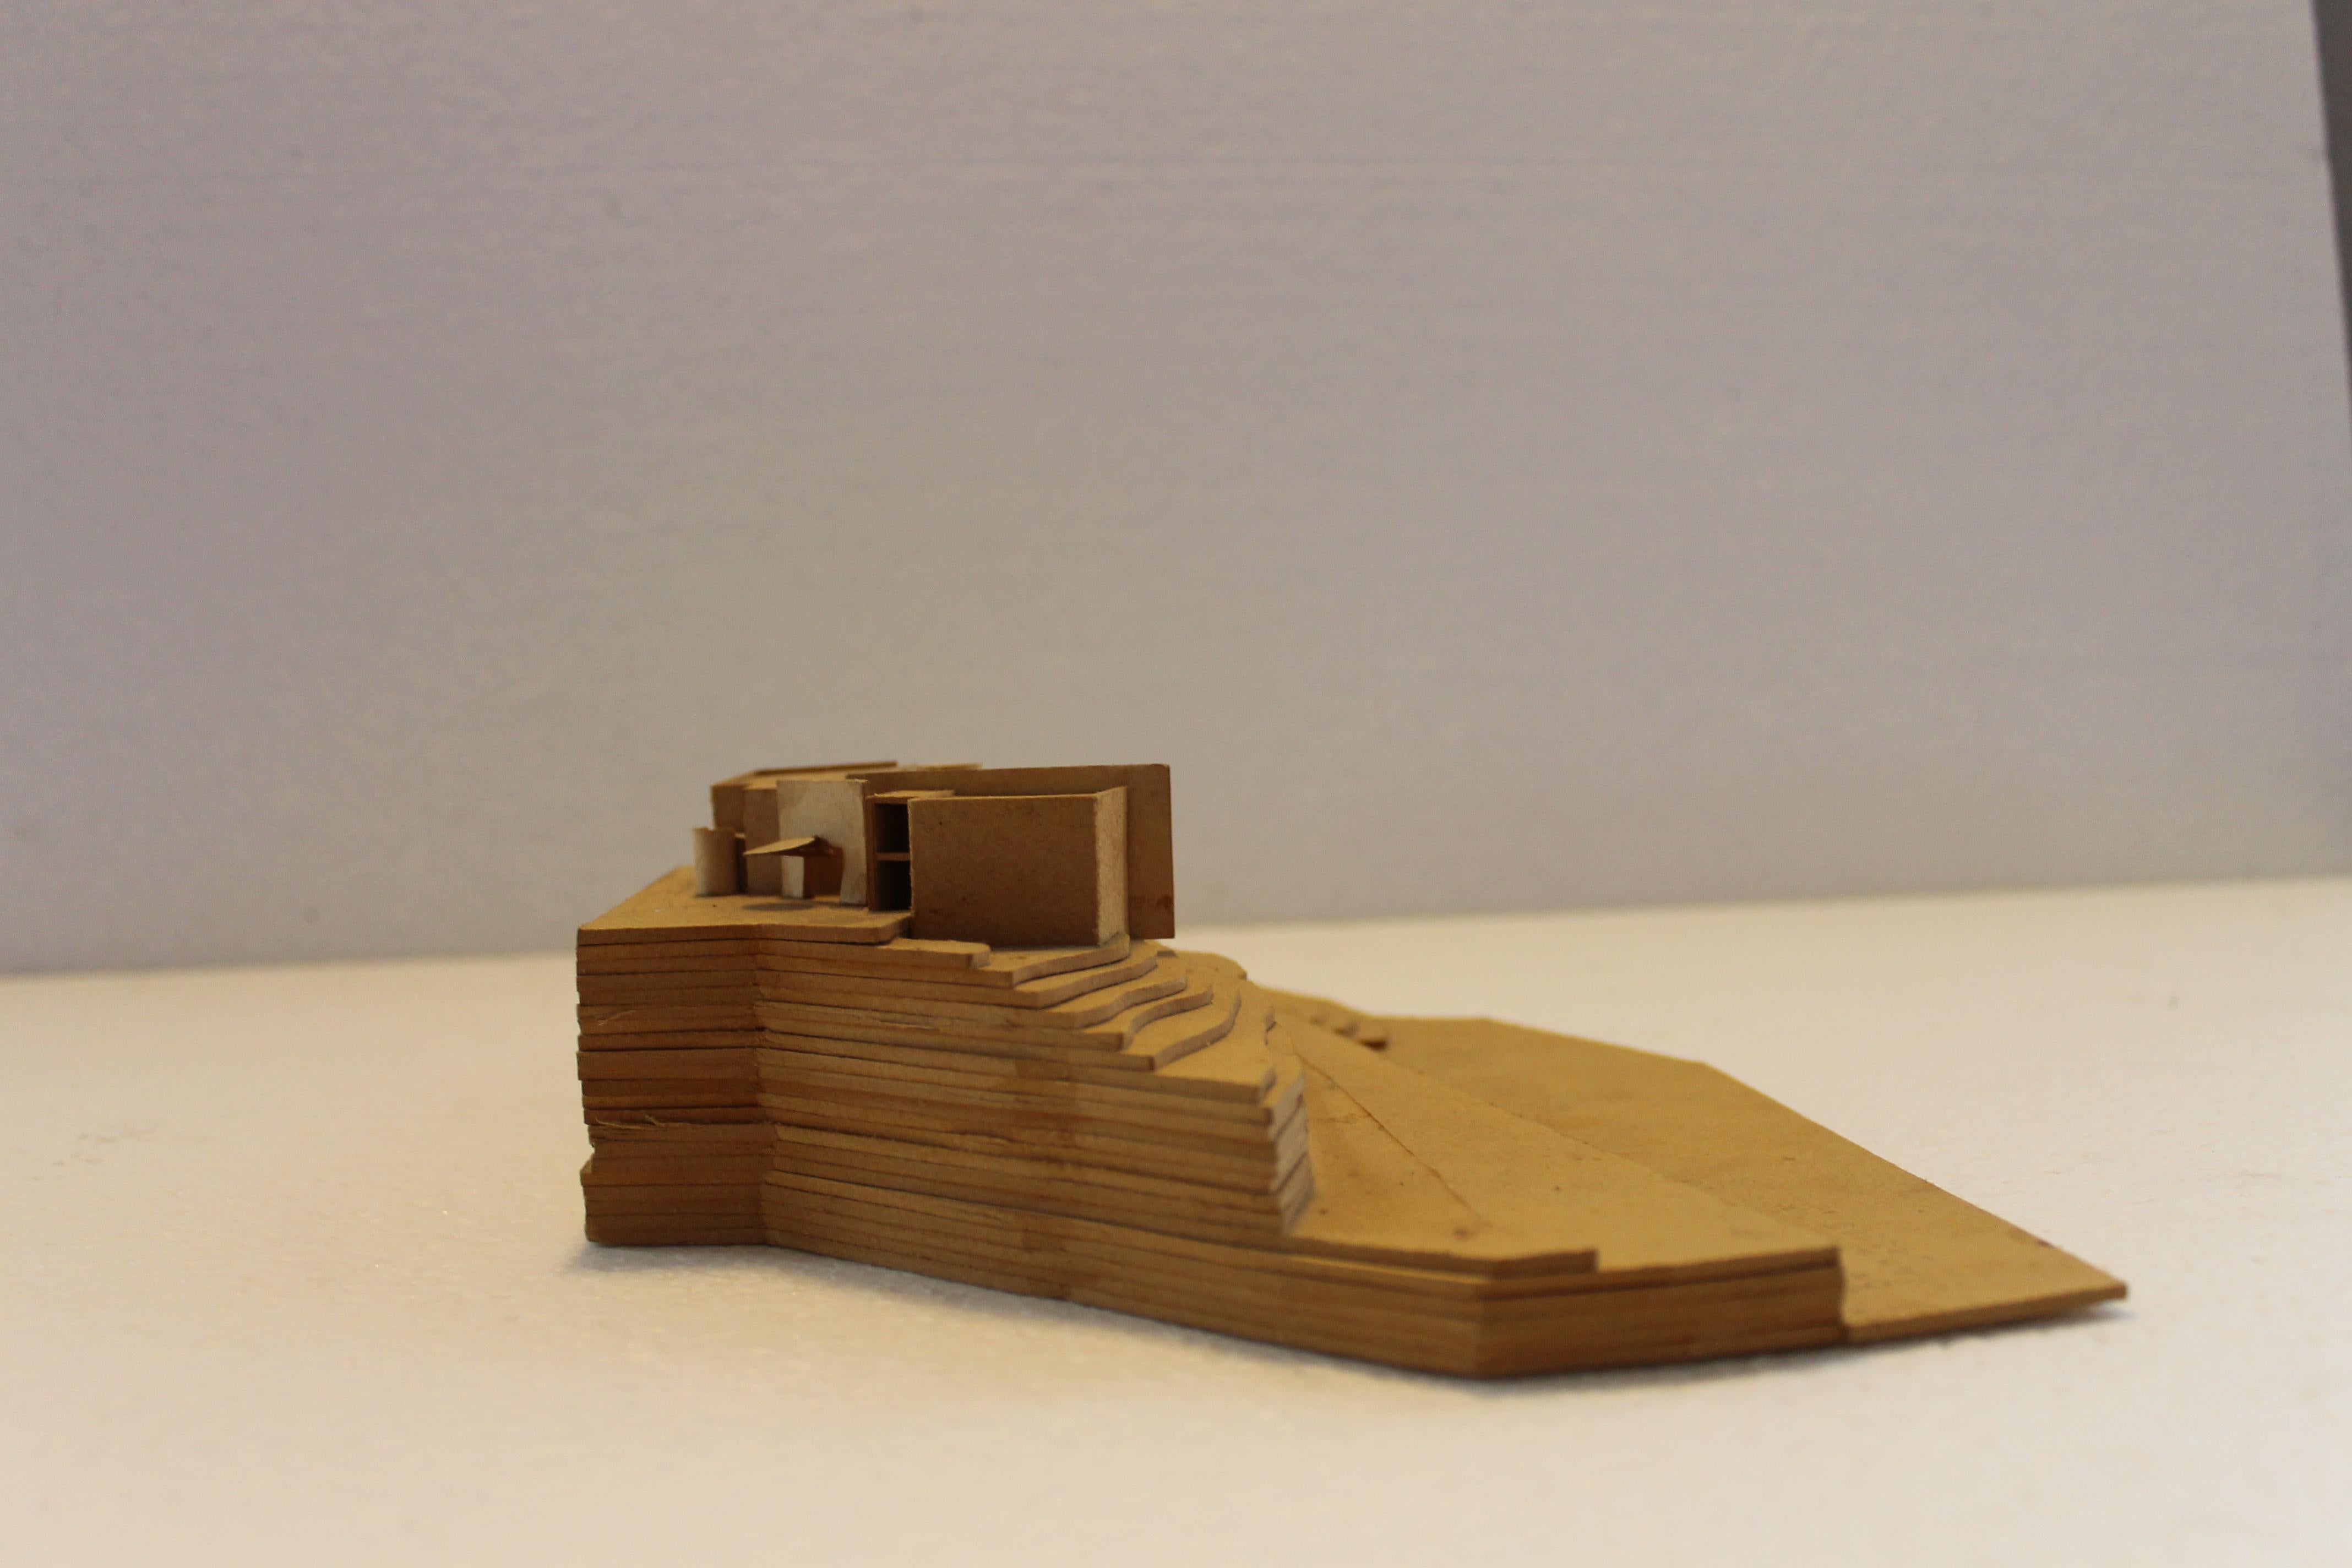 Afra and Tobia Scarpa Model 'Maquette' of Aobadai House, Tokyo 'Japan' 1995 For Sale 6